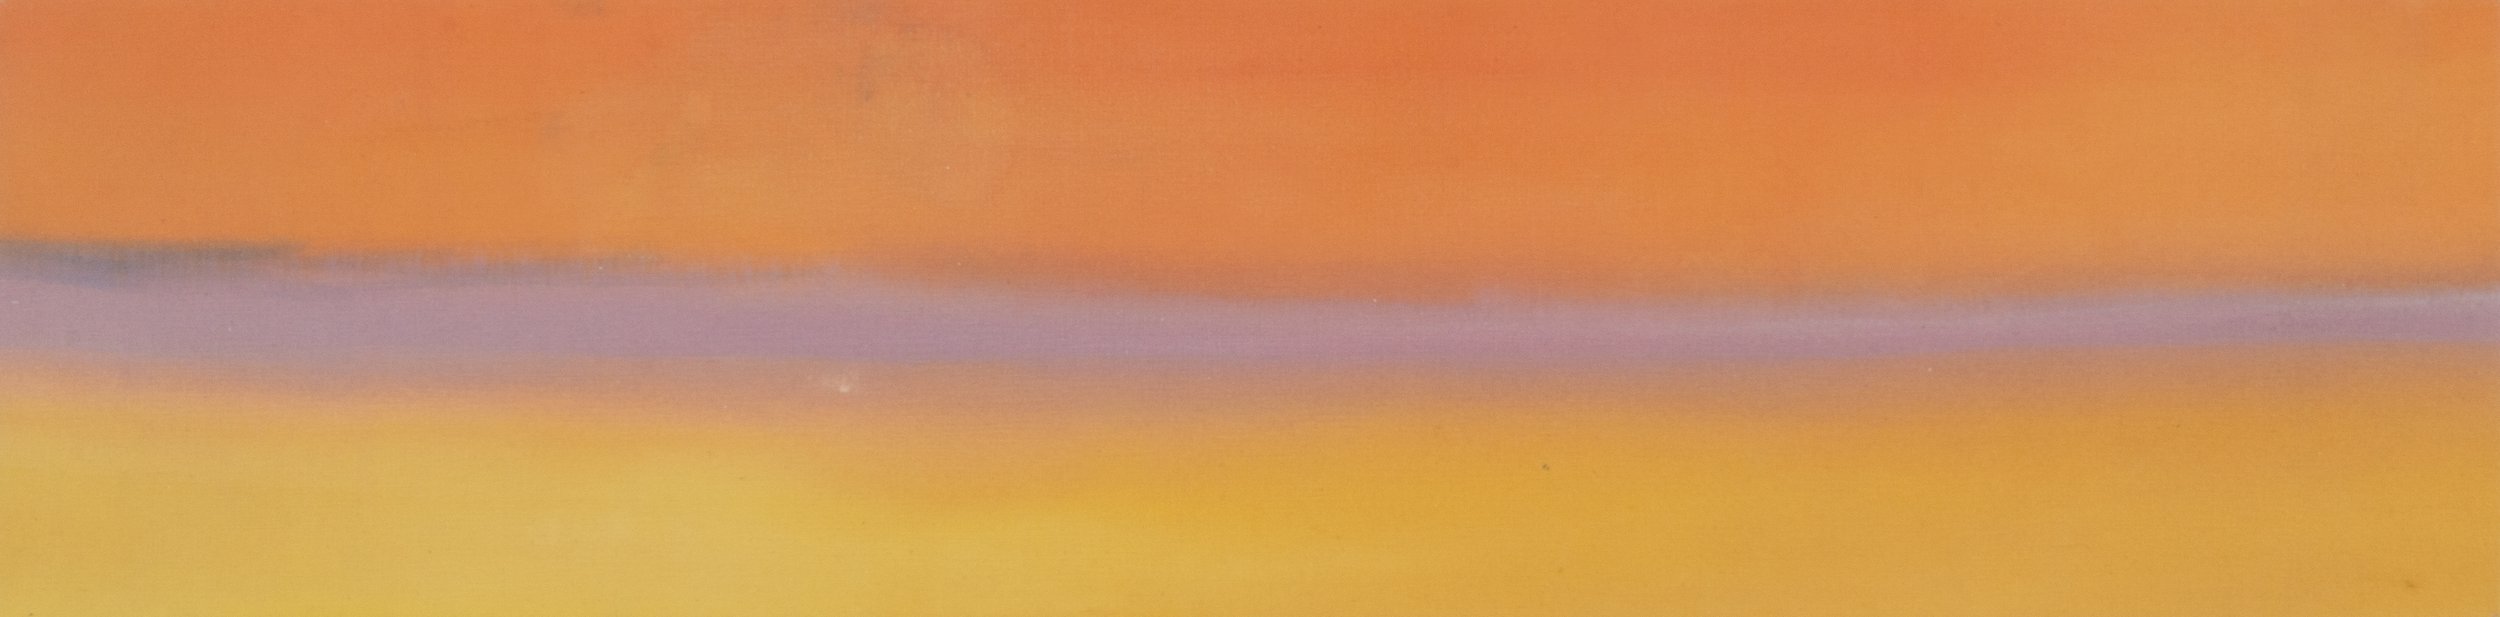 Sunset on the Horizon, 1970, acrylic on canvas, 10.5x42 inches